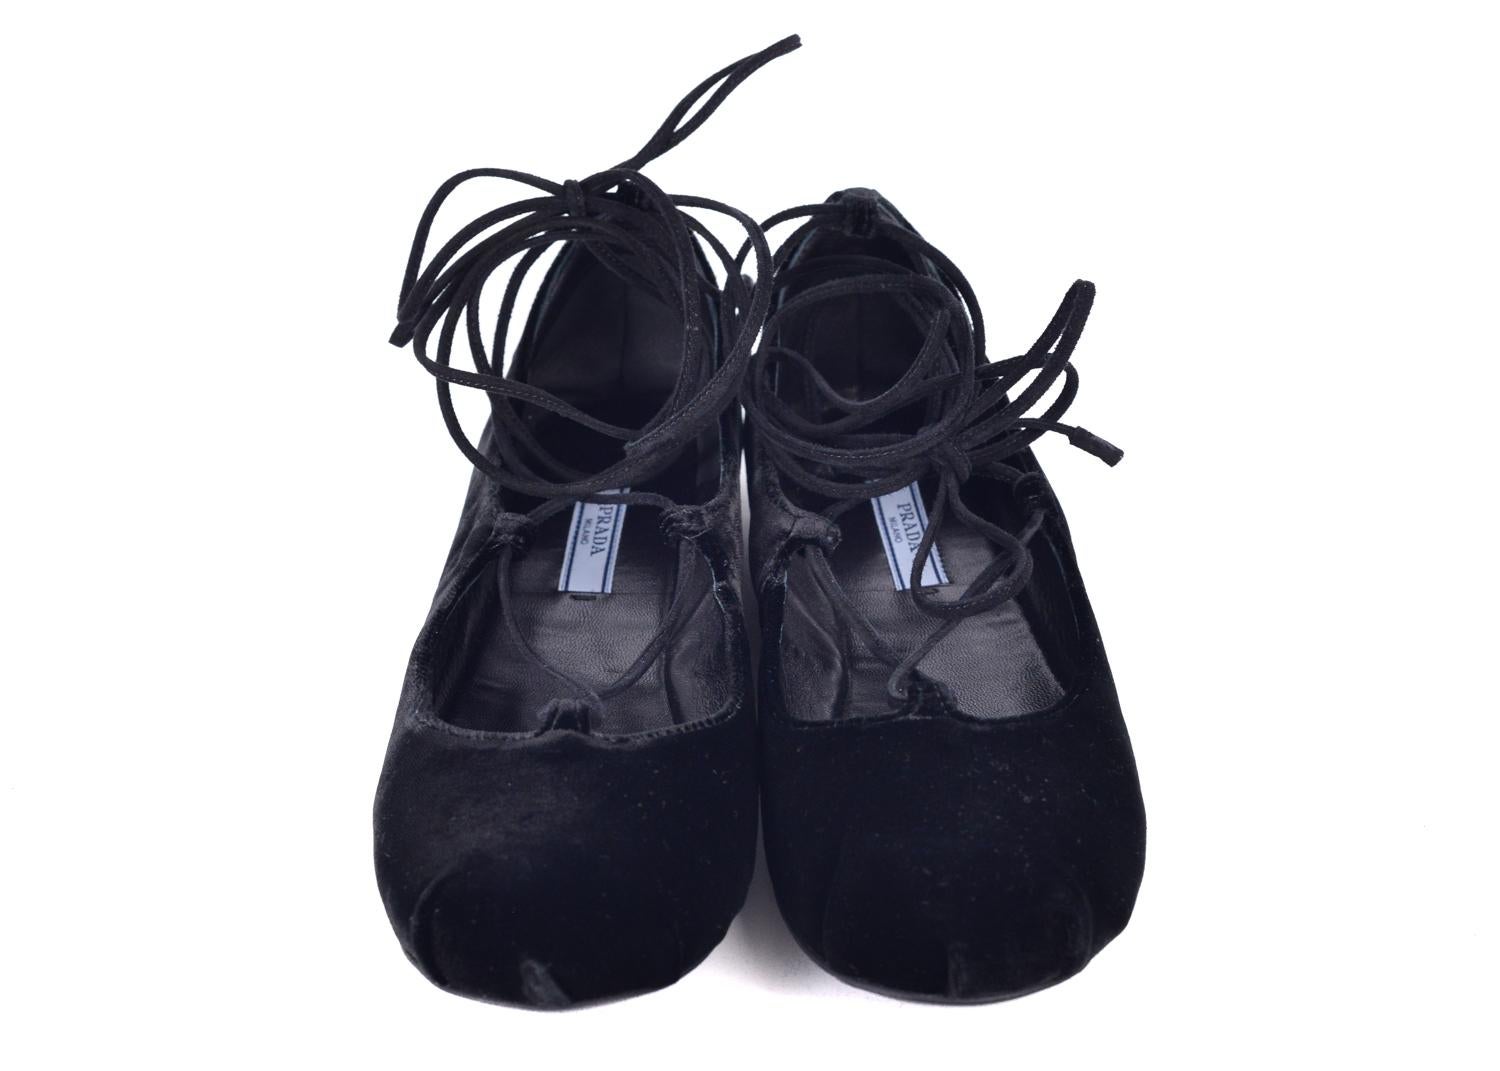 Prada Women's Black Velvet Lace Up Round Toe Ballerina Flats In New Condition For Sale In Brooklyn, NY